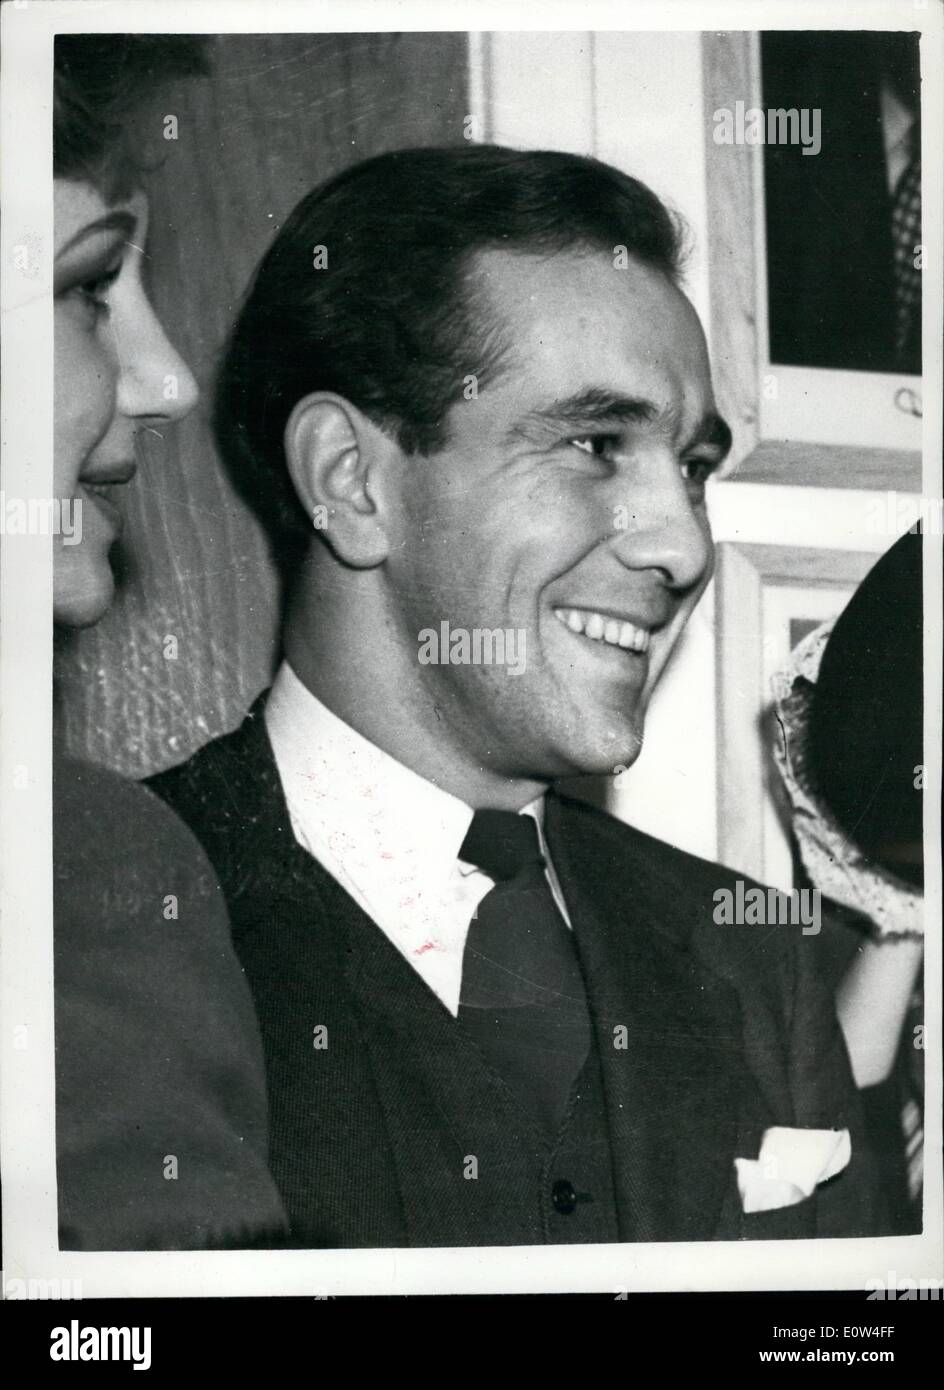 Apr. 04, 1961 - T.V. MAN ACCUSED OF STUDIO STABBING.. T,V, Producer DENNIS VANCE (37) appeared at the Feltham Magistrates Court - apr-04-1961-tv-man-accused-of-studio-stabbing-tv-producer-dennis-vance-E0W4FF